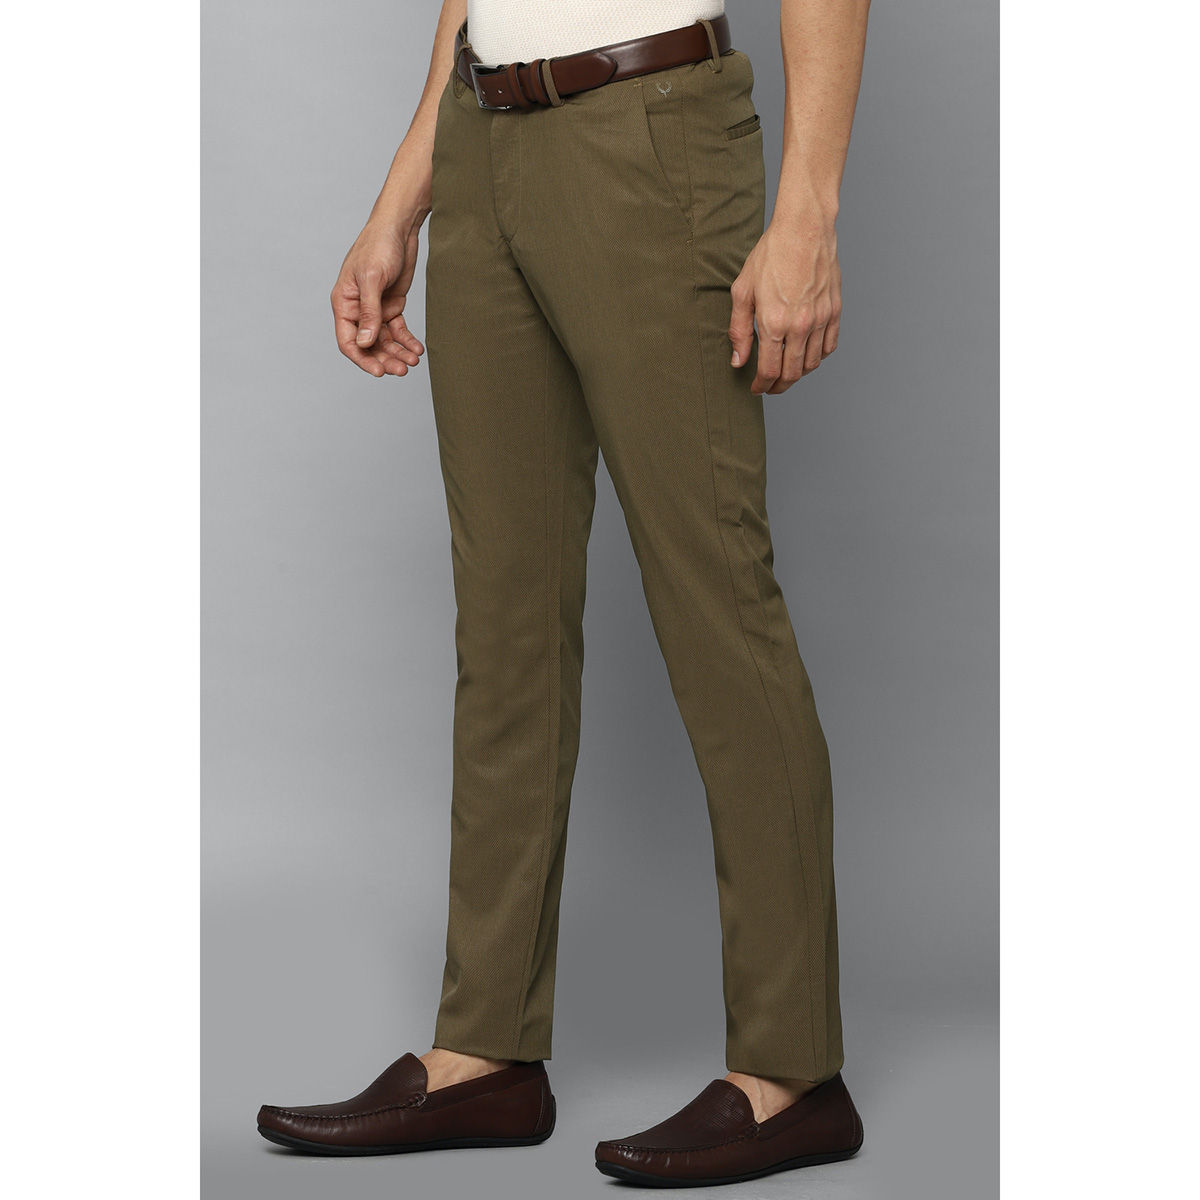 Peter England Casual Trousers : Buy Peter England Men Black Solid Super  Slim Fit Casual Trousers Online | Nykaa Fashion